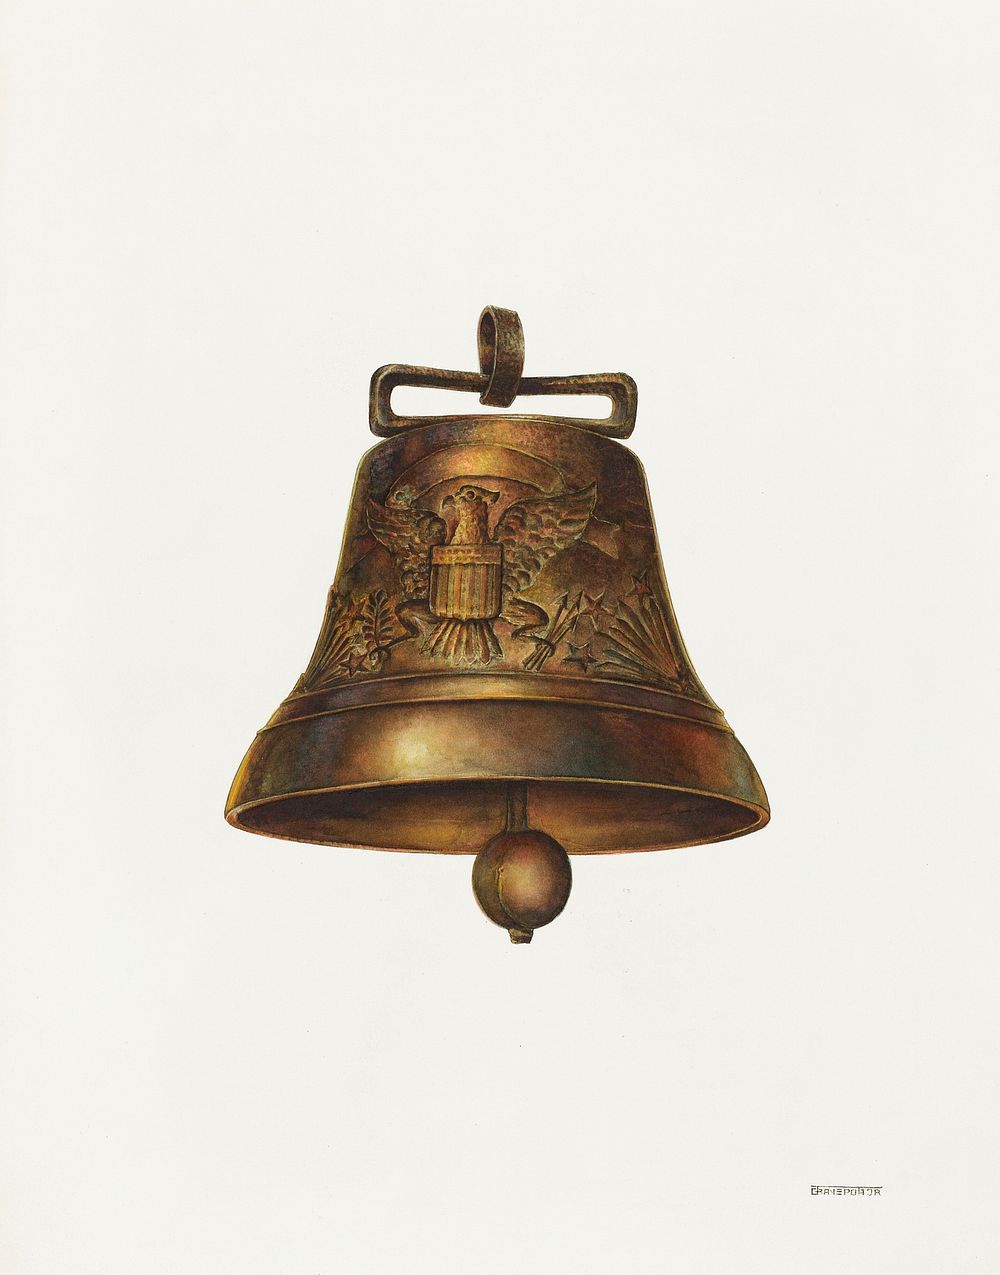 Animal Bell (1938) by Gerald Transpota. Original from The National Gallery of Art. Digitally enhanced by rawpixel.